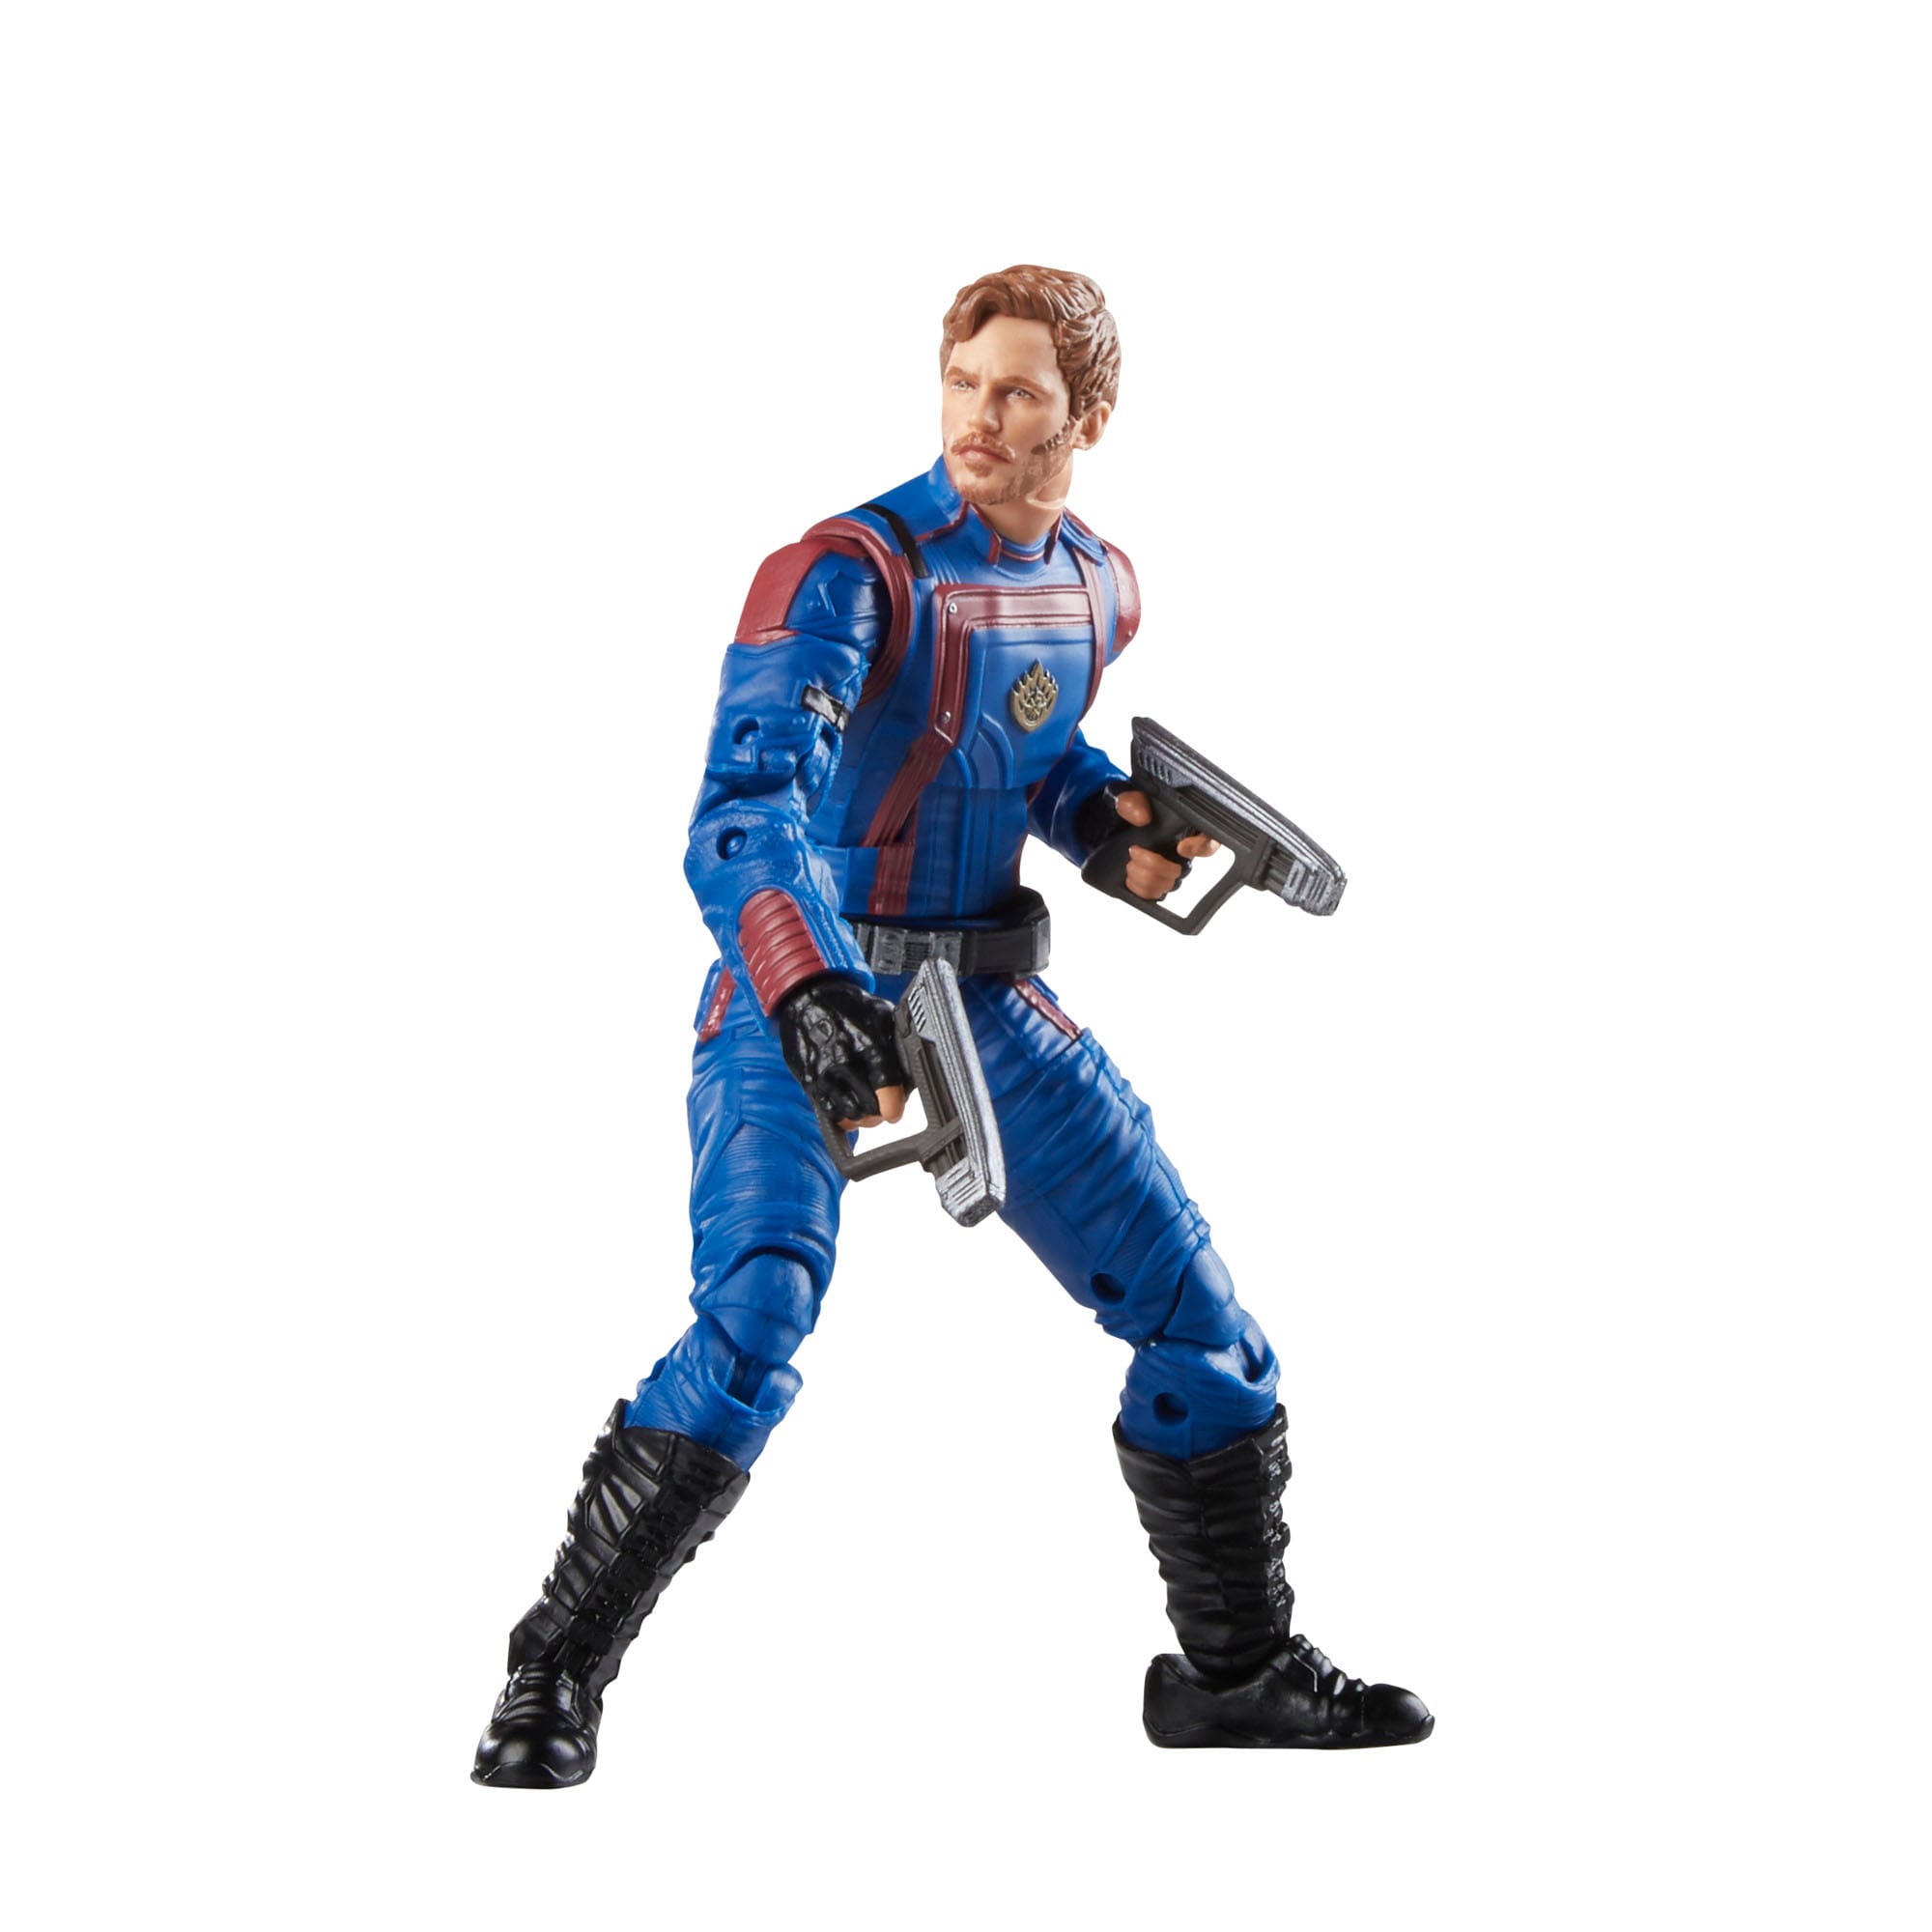 Guardians of the Galaxy Comics Marvel Legends Actionfigur Star-Lord 15 cm HASF6602 5010994179885